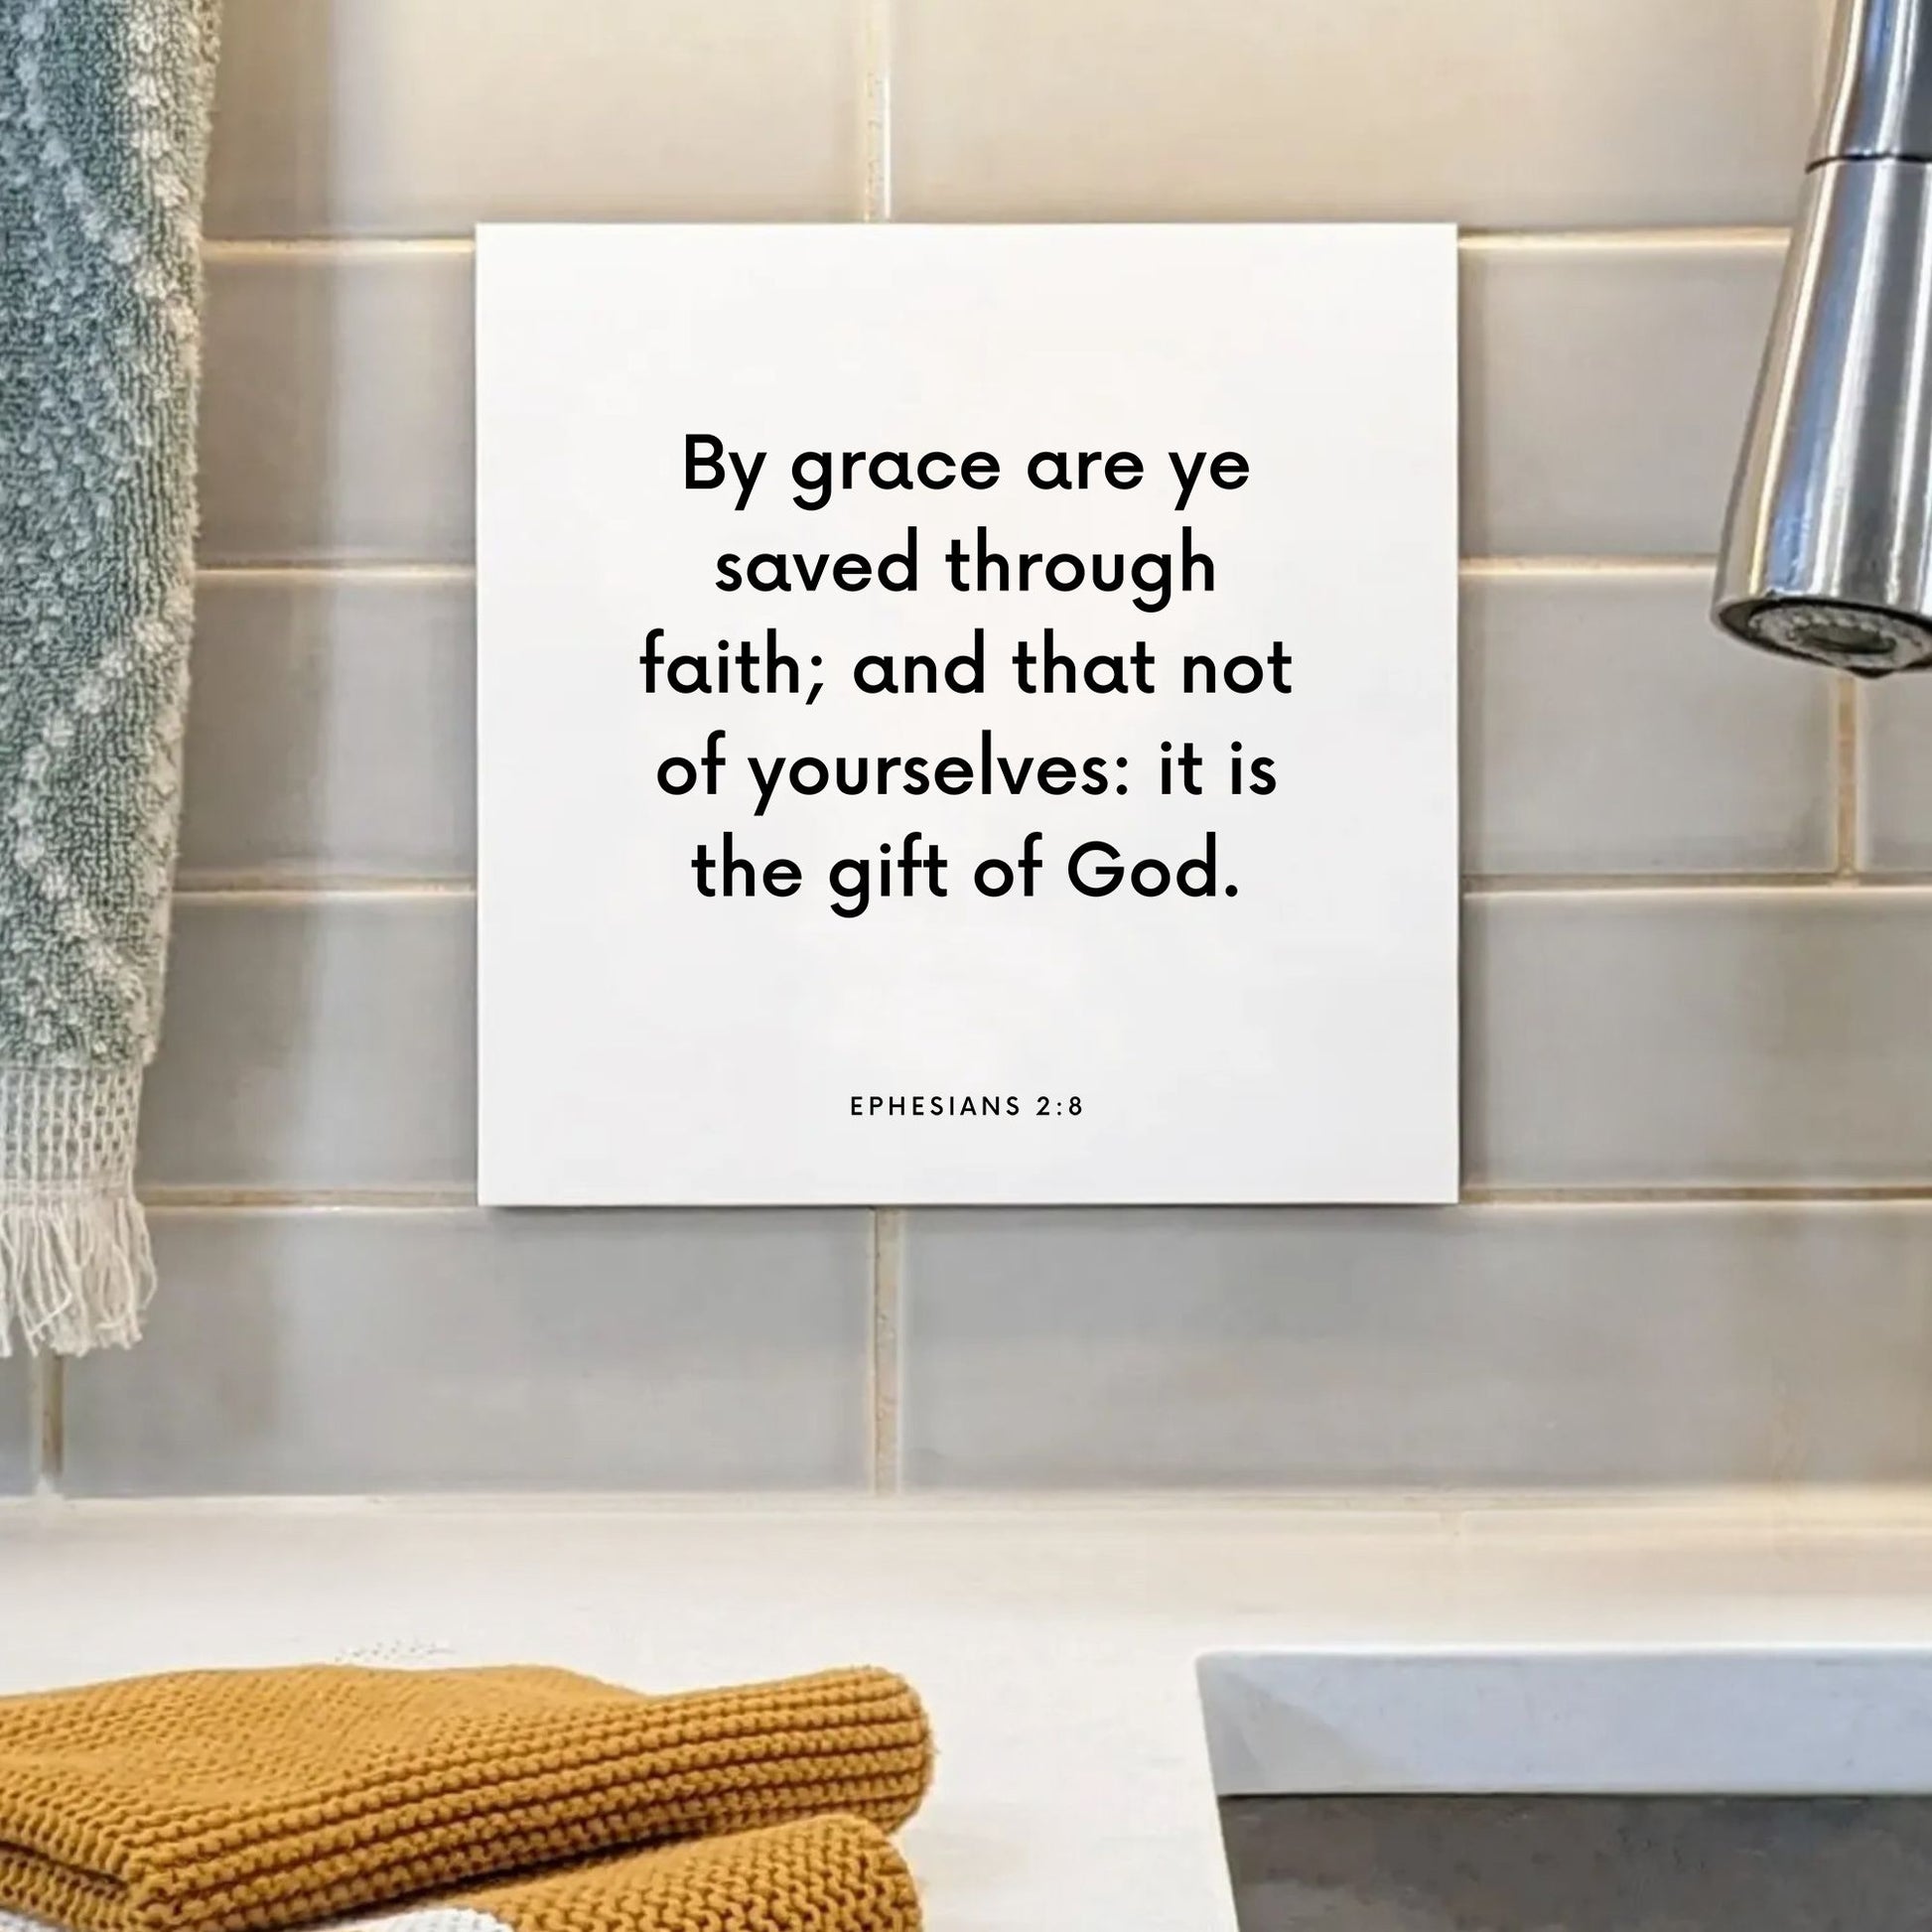 Sink mouting of the scripture tile for Ephesians 2:8 - "By grace are ye saved through faith"